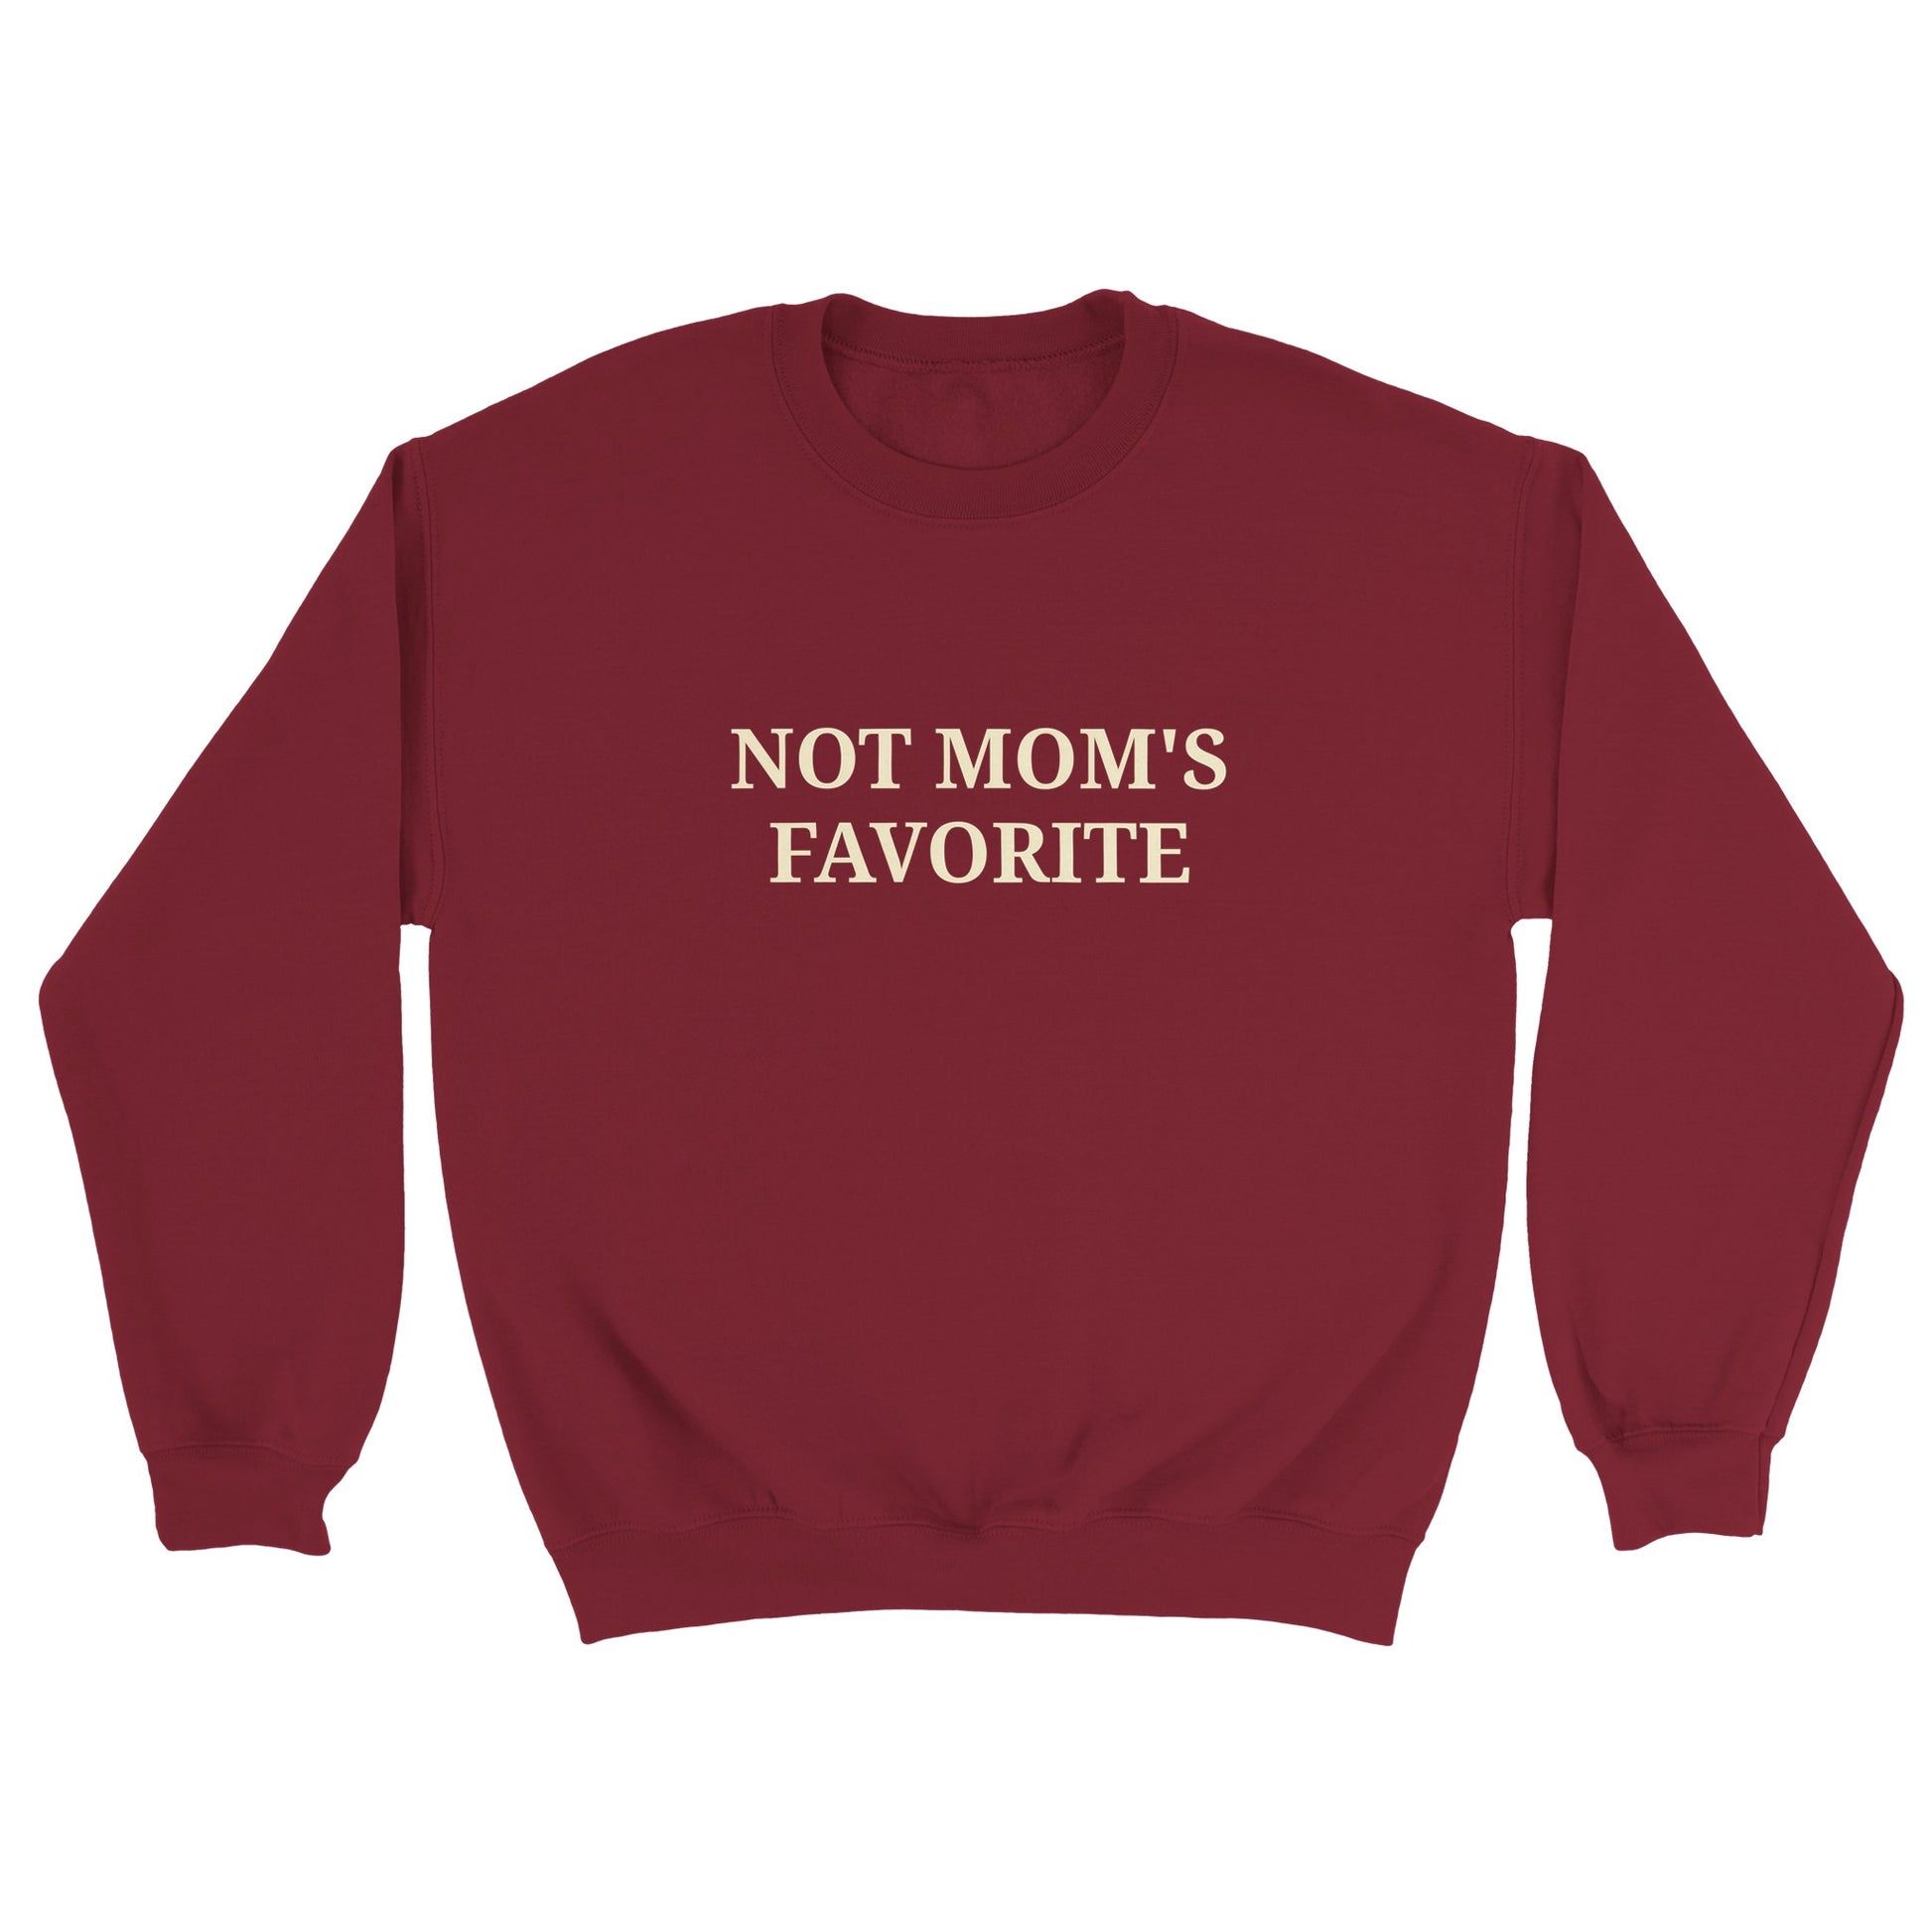 a red sweatshirt with "Not mom's favorite" written across the chest